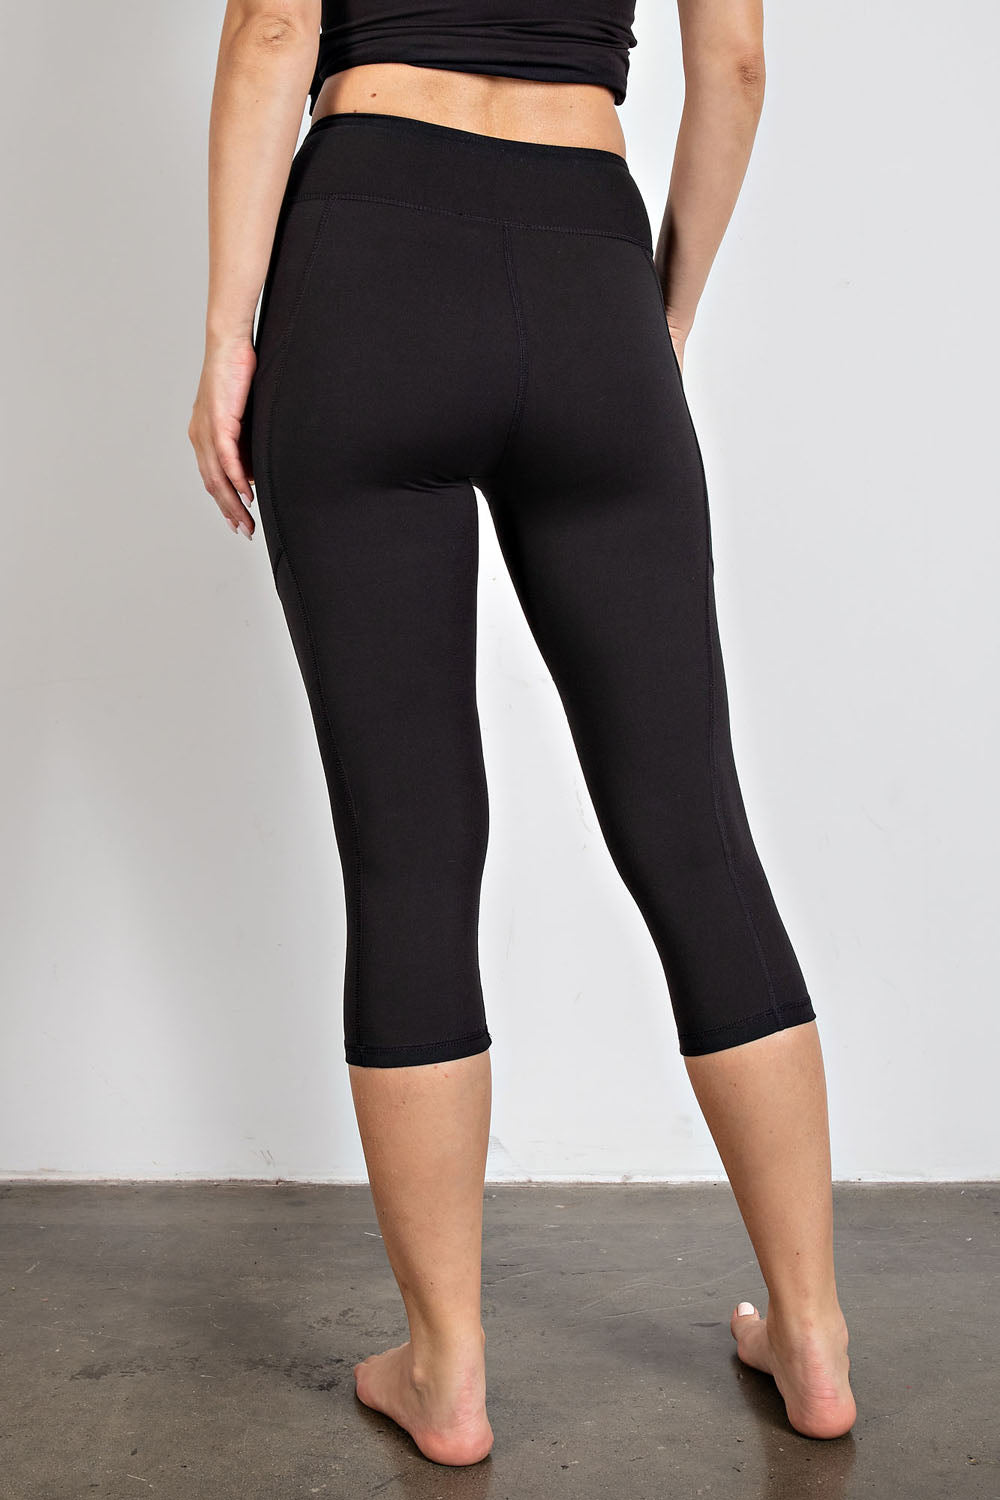 Conceited High Waist Leggings in Shorts, Capri and Full Length - Buttery  Soft - 3 High Waistband - Regular and Plus Size